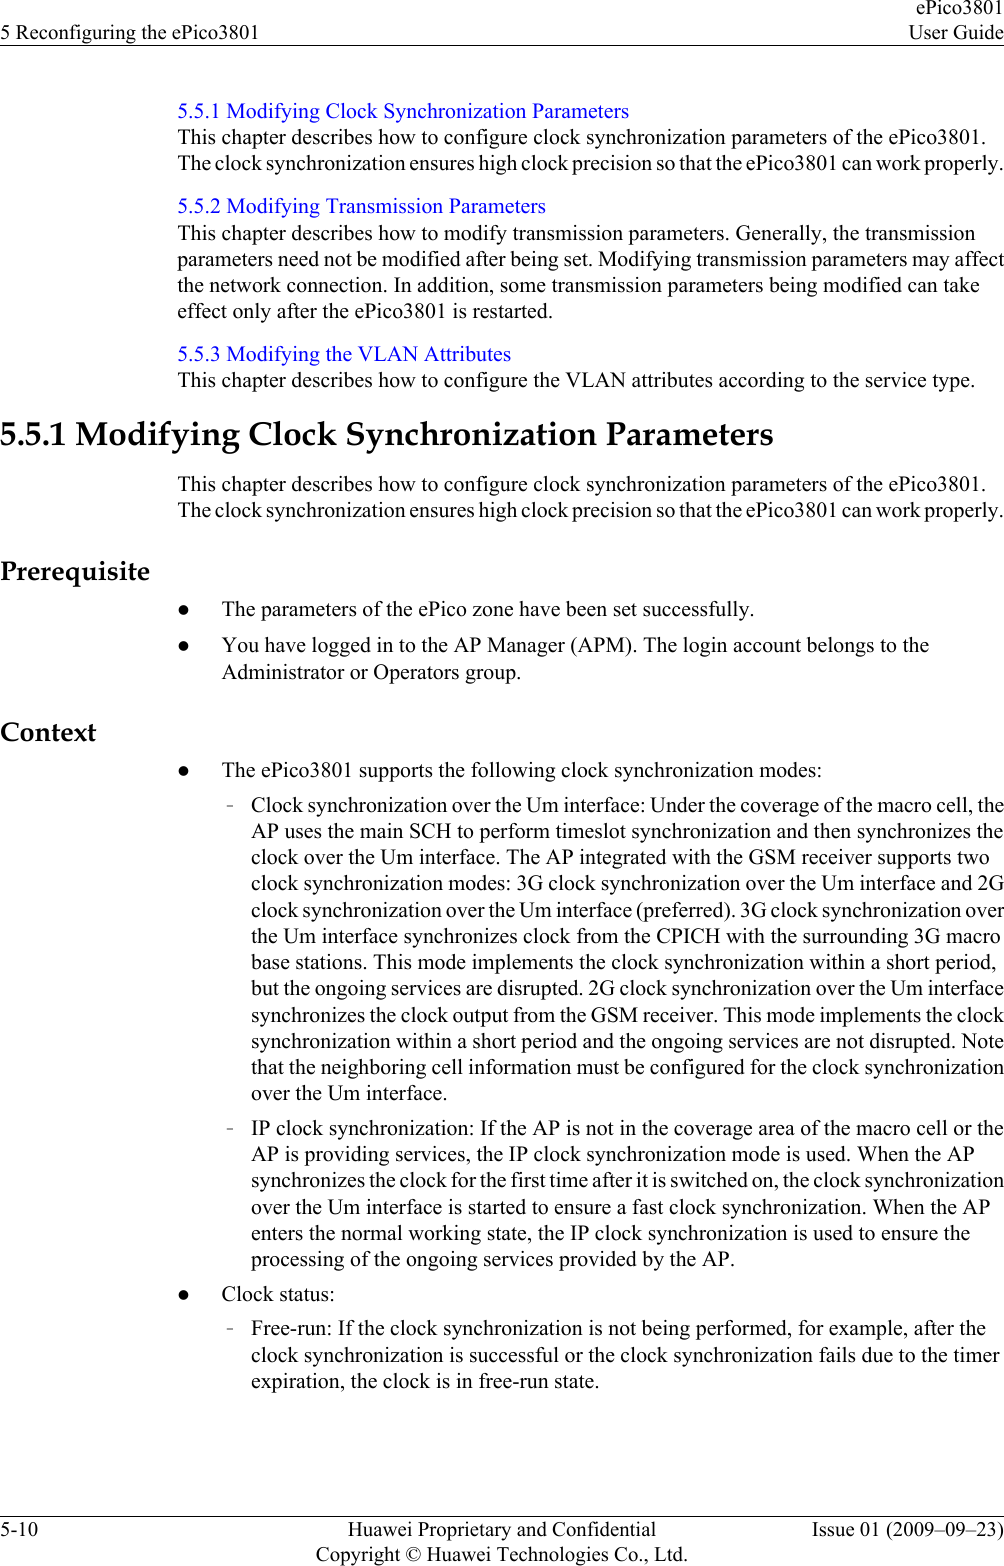 5.5.1 Modifying Clock Synchronization ParametersThis chapter describes how to configure clock synchronization parameters of the ePico3801.The clock synchronization ensures high clock precision so that the ePico3801 can work properly.5.5.2 Modifying Transmission ParametersThis chapter describes how to modify transmission parameters. Generally, the transmissionparameters need not be modified after being set. Modifying transmission parameters may affectthe network connection. In addition, some transmission parameters being modified can takeeffect only after the ePico3801 is restarted.5.5.3 Modifying the VLAN AttributesThis chapter describes how to configure the VLAN attributes according to the service type.5.5.1 Modifying Clock Synchronization ParametersThis chapter describes how to configure clock synchronization parameters of the ePico3801.The clock synchronization ensures high clock precision so that the ePico3801 can work properly.PrerequisitelThe parameters of the ePico zone have been set successfully.lYou have logged in to the AP Manager (APM). The login account belongs to theAdministrator or Operators group.ContextlThe ePico3801 supports the following clock synchronization modes:–Clock synchronization over the Um interface: Under the coverage of the macro cell, theAP uses the main SCH to perform timeslot synchronization and then synchronizes theclock over the Um interface. The AP integrated with the GSM receiver supports twoclock synchronization modes: 3G clock synchronization over the Um interface and 2Gclock synchronization over the Um interface (preferred). 3G clock synchronization overthe Um interface synchronizes clock from the CPICH with the surrounding 3G macrobase stations. This mode implements the clock synchronization within a short period,but the ongoing services are disrupted. 2G clock synchronization over the Um interfacesynchronizes the clock output from the GSM receiver. This mode implements the clocksynchronization within a short period and the ongoing services are not disrupted. Notethat the neighboring cell information must be configured for the clock synchronizationover the Um interface.–IP clock synchronization: If the AP is not in the coverage area of the macro cell or theAP is providing services, the IP clock synchronization mode is used. When the APsynchronizes the clock for the first time after it is switched on, the clock synchronizationover the Um interface is started to ensure a fast clock synchronization. When the APenters the normal working state, the IP clock synchronization is used to ensure theprocessing of the ongoing services provided by the AP.lClock status:–Free-run: If the clock synchronization is not being performed, for example, after theclock synchronization is successful or the clock synchronization fails due to the timerexpiration, the clock is in free-run state.5 Reconfiguring the ePico3801ePico3801User Guide5-10 Huawei Proprietary and ConfidentialCopyright © Huawei Technologies Co., Ltd.Issue 01 (2009–09–23)